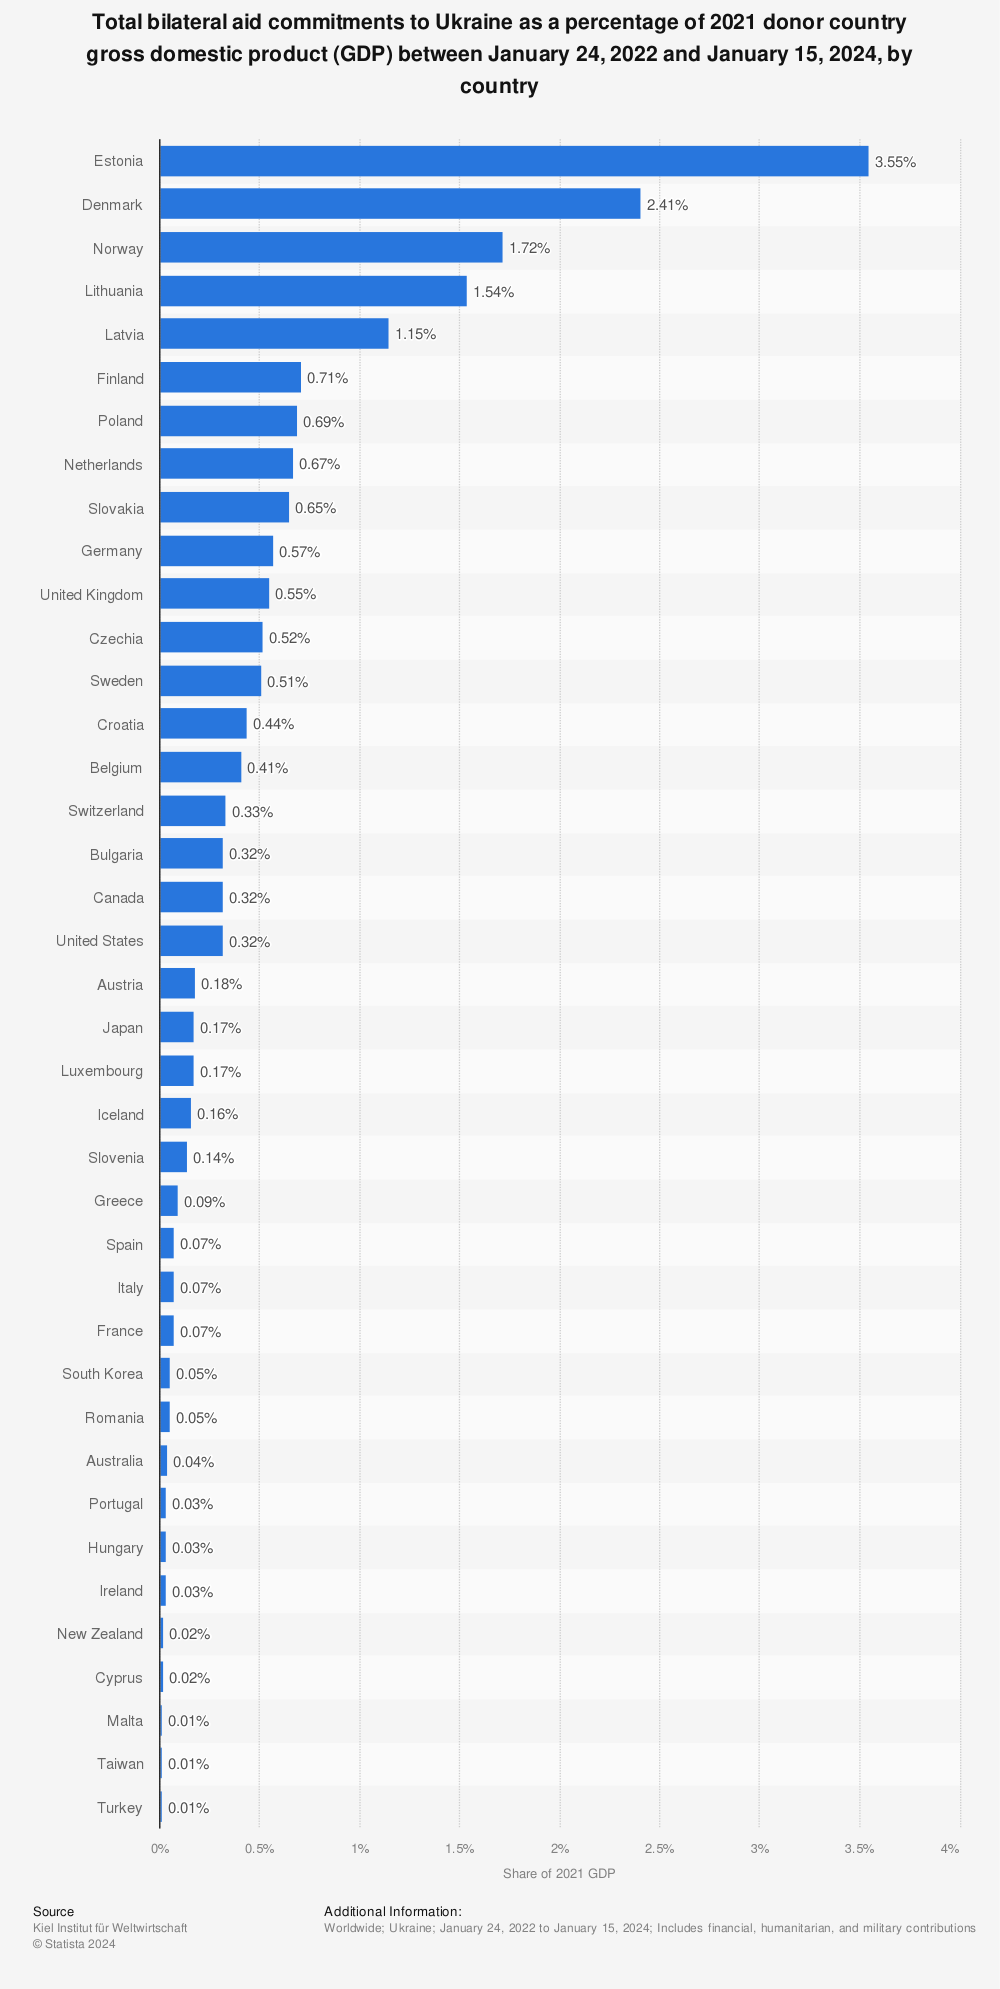 Statistic: Total bilateral aid commitments to Ukraine as a percentage of donor gross domestic product (GDP) between February 24 and March 27, 2022, by country | Statista